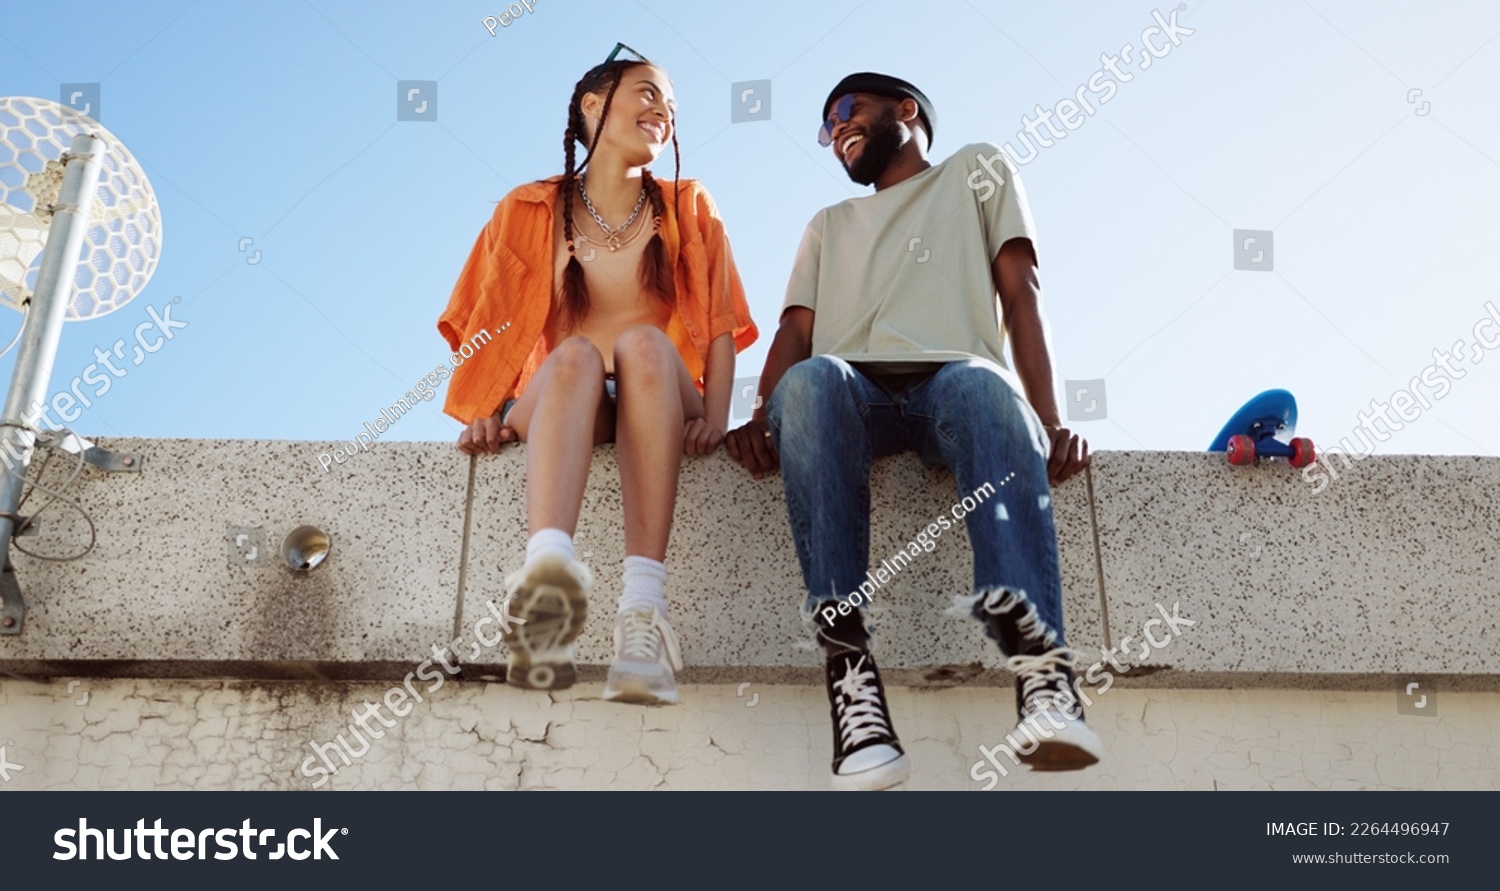 Cool, fashion and joke with young couple hang out on city building together bonding. Interracial stylish young people on a funny city date. Silly, goofy and laughing black man and woman joking #2264496947